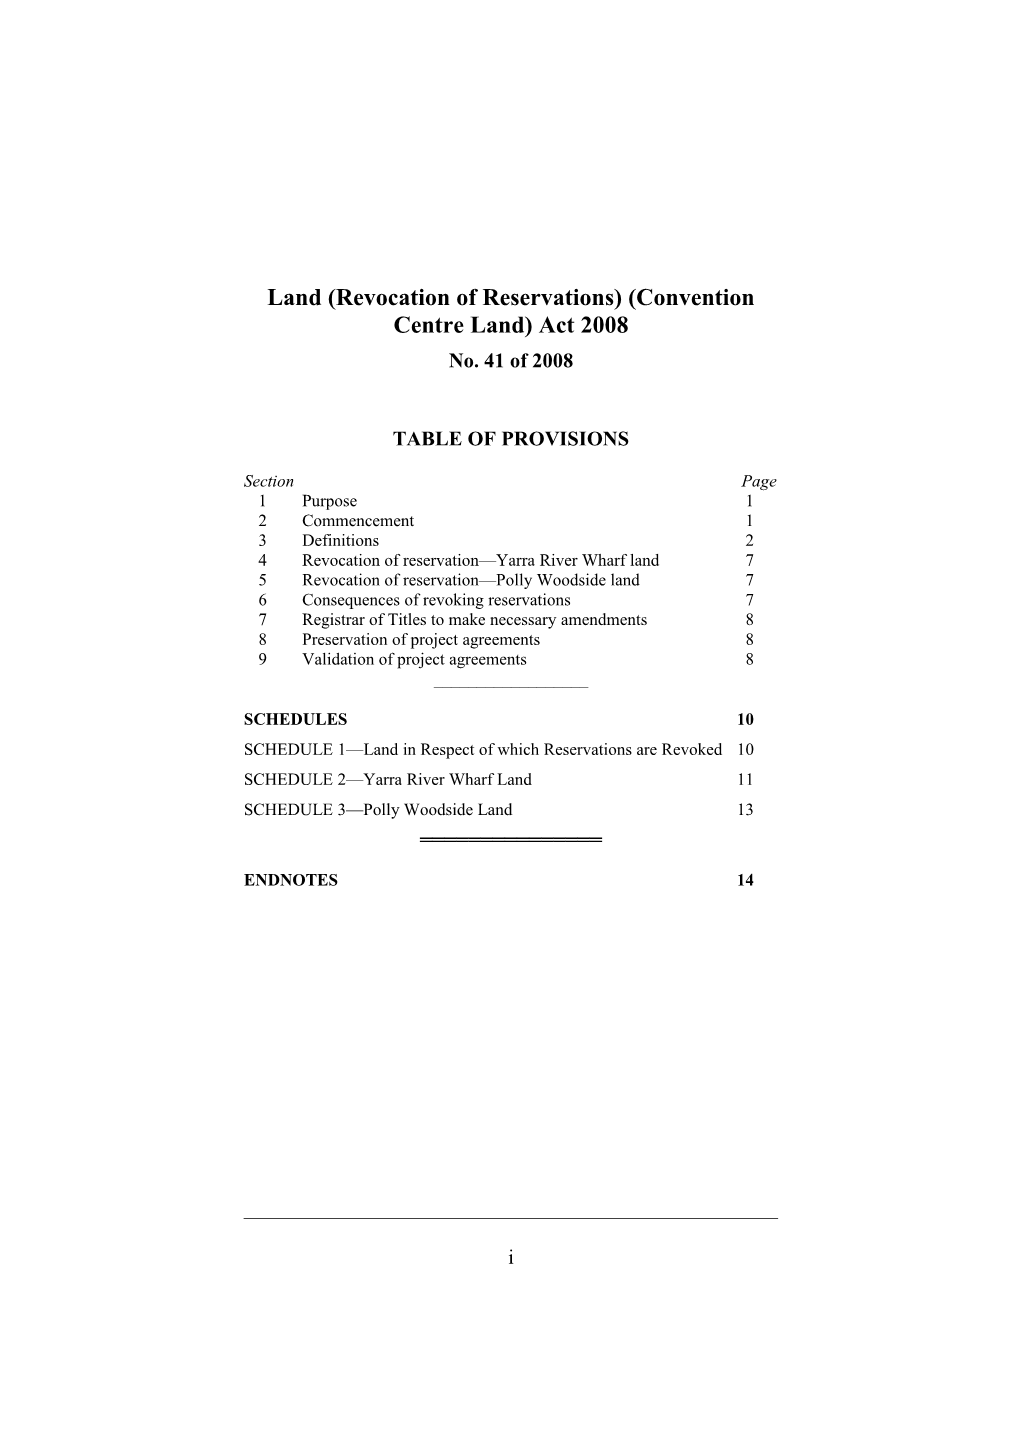 Land (Revocation of Reservations) (Convention Centre Land) Act 2008